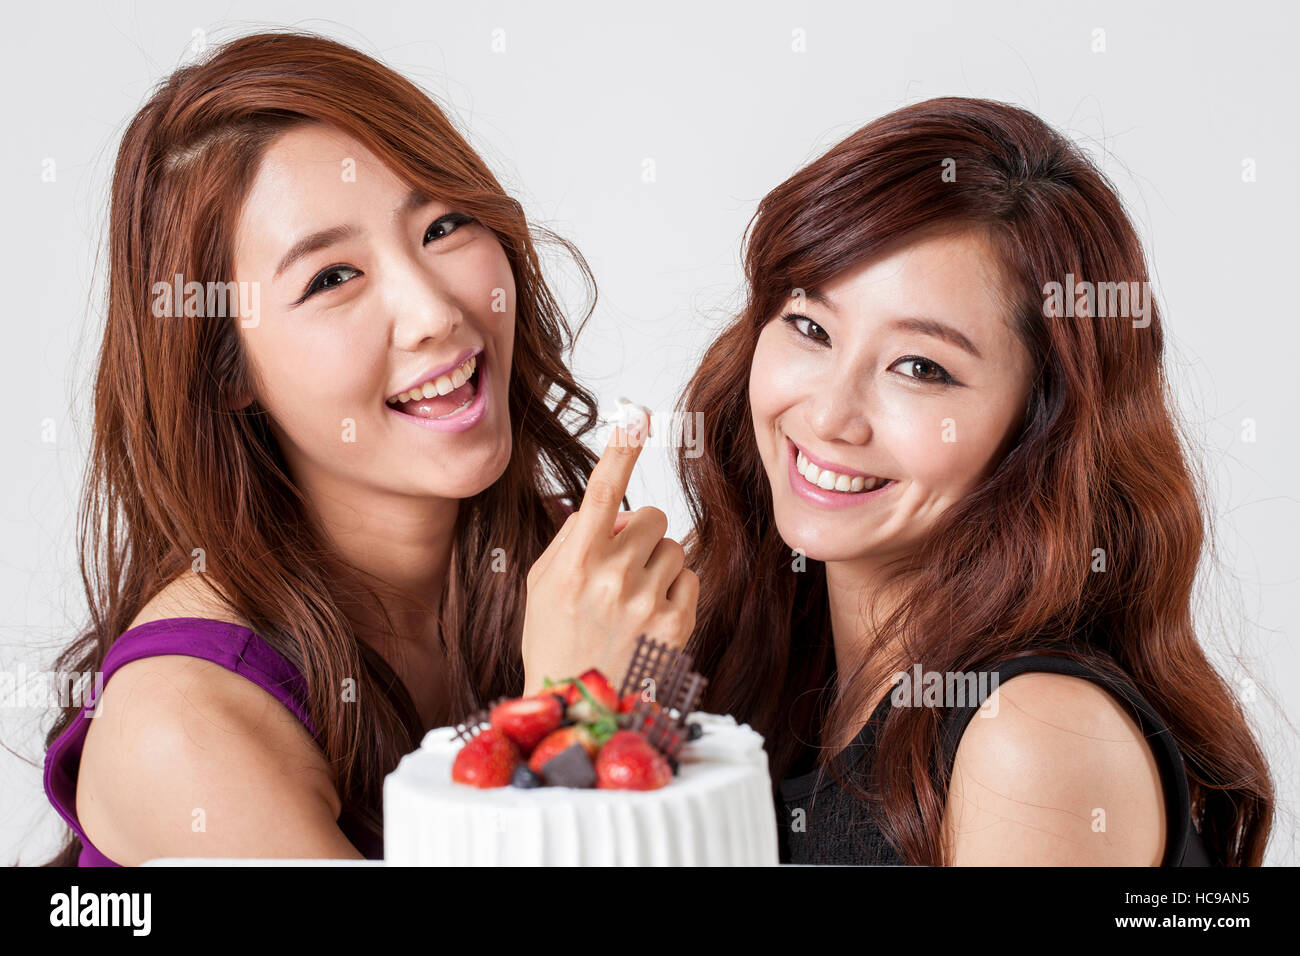 Two young smiling women posing with a cake Stock Photo